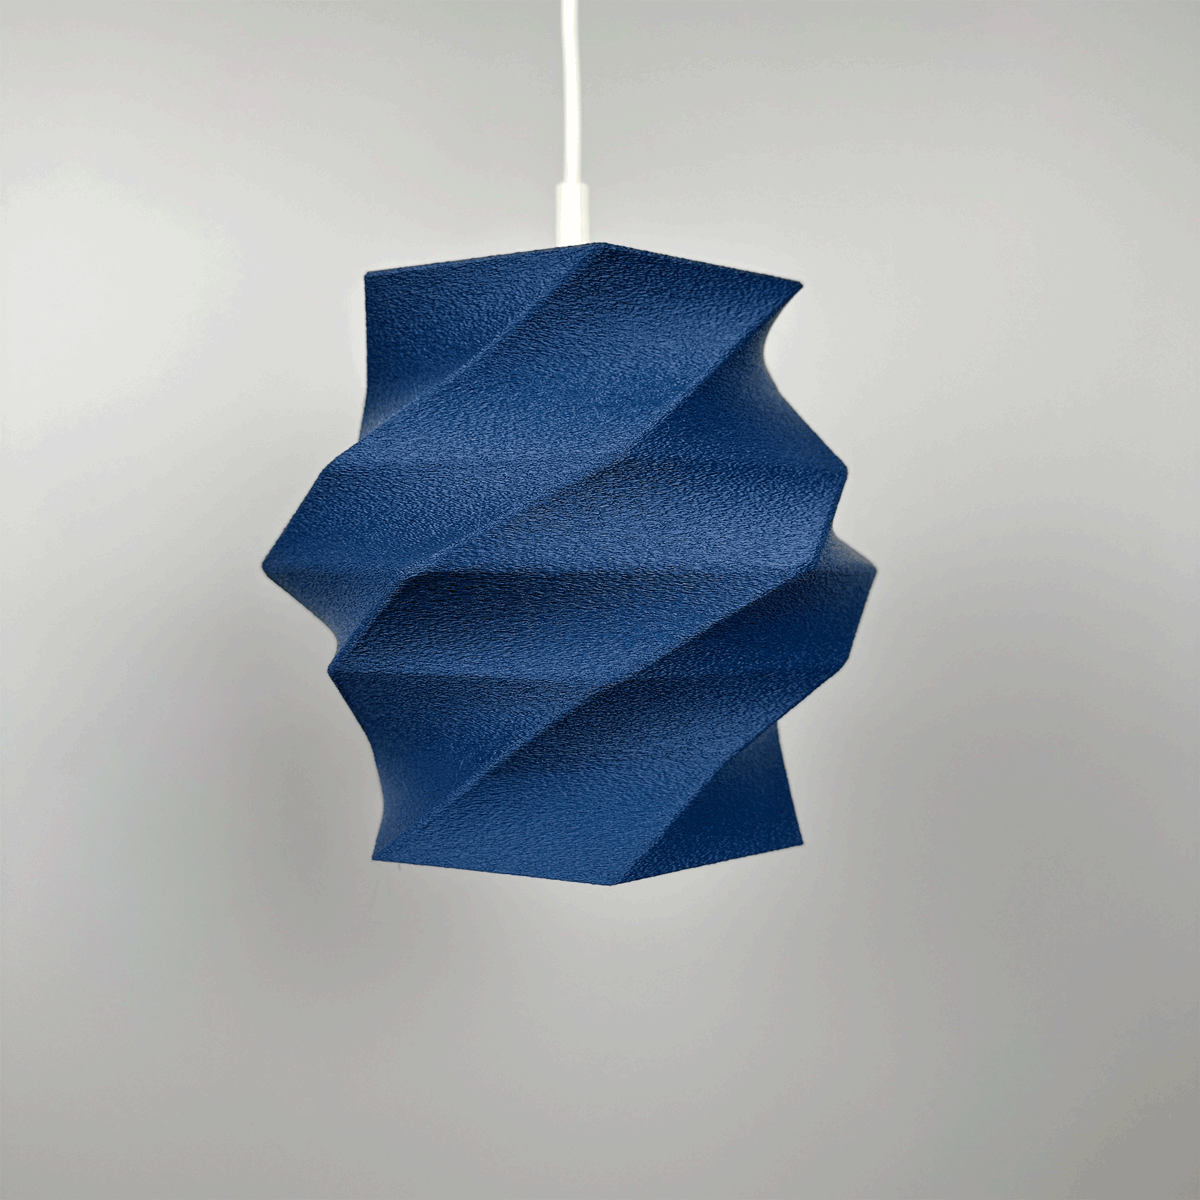 The Flowing Fuzzy Skin Lampshade